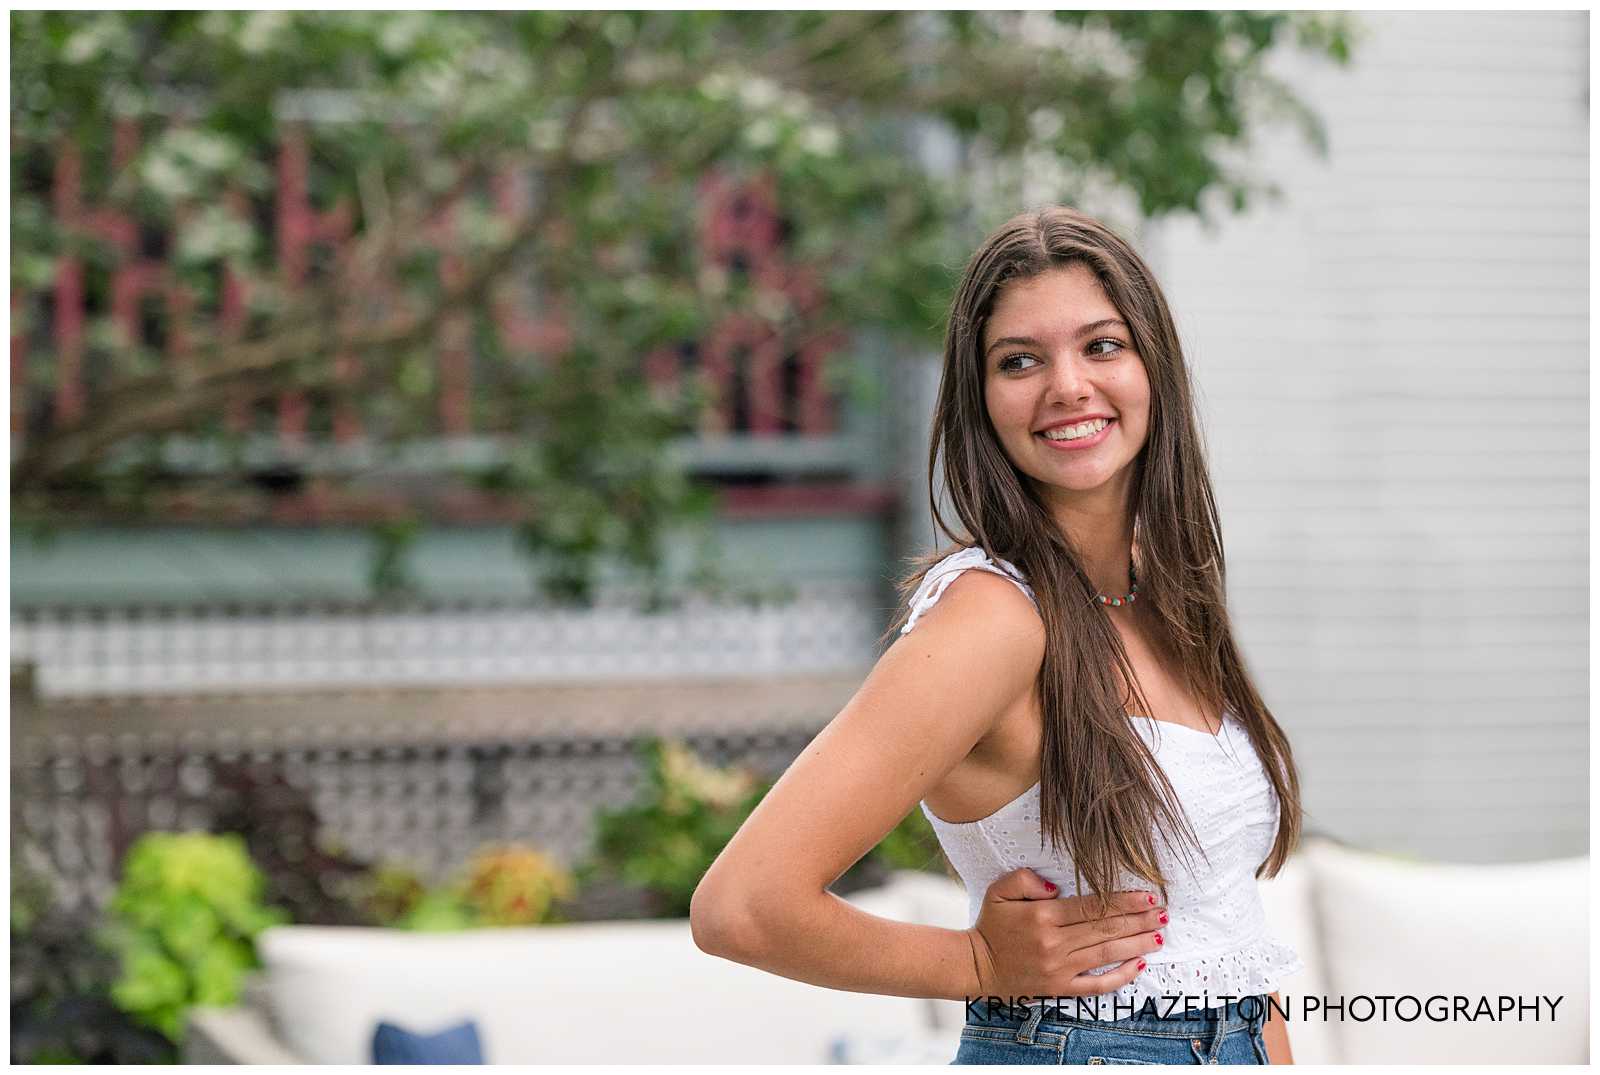 High school senior girl looking over her shoulder and smiling